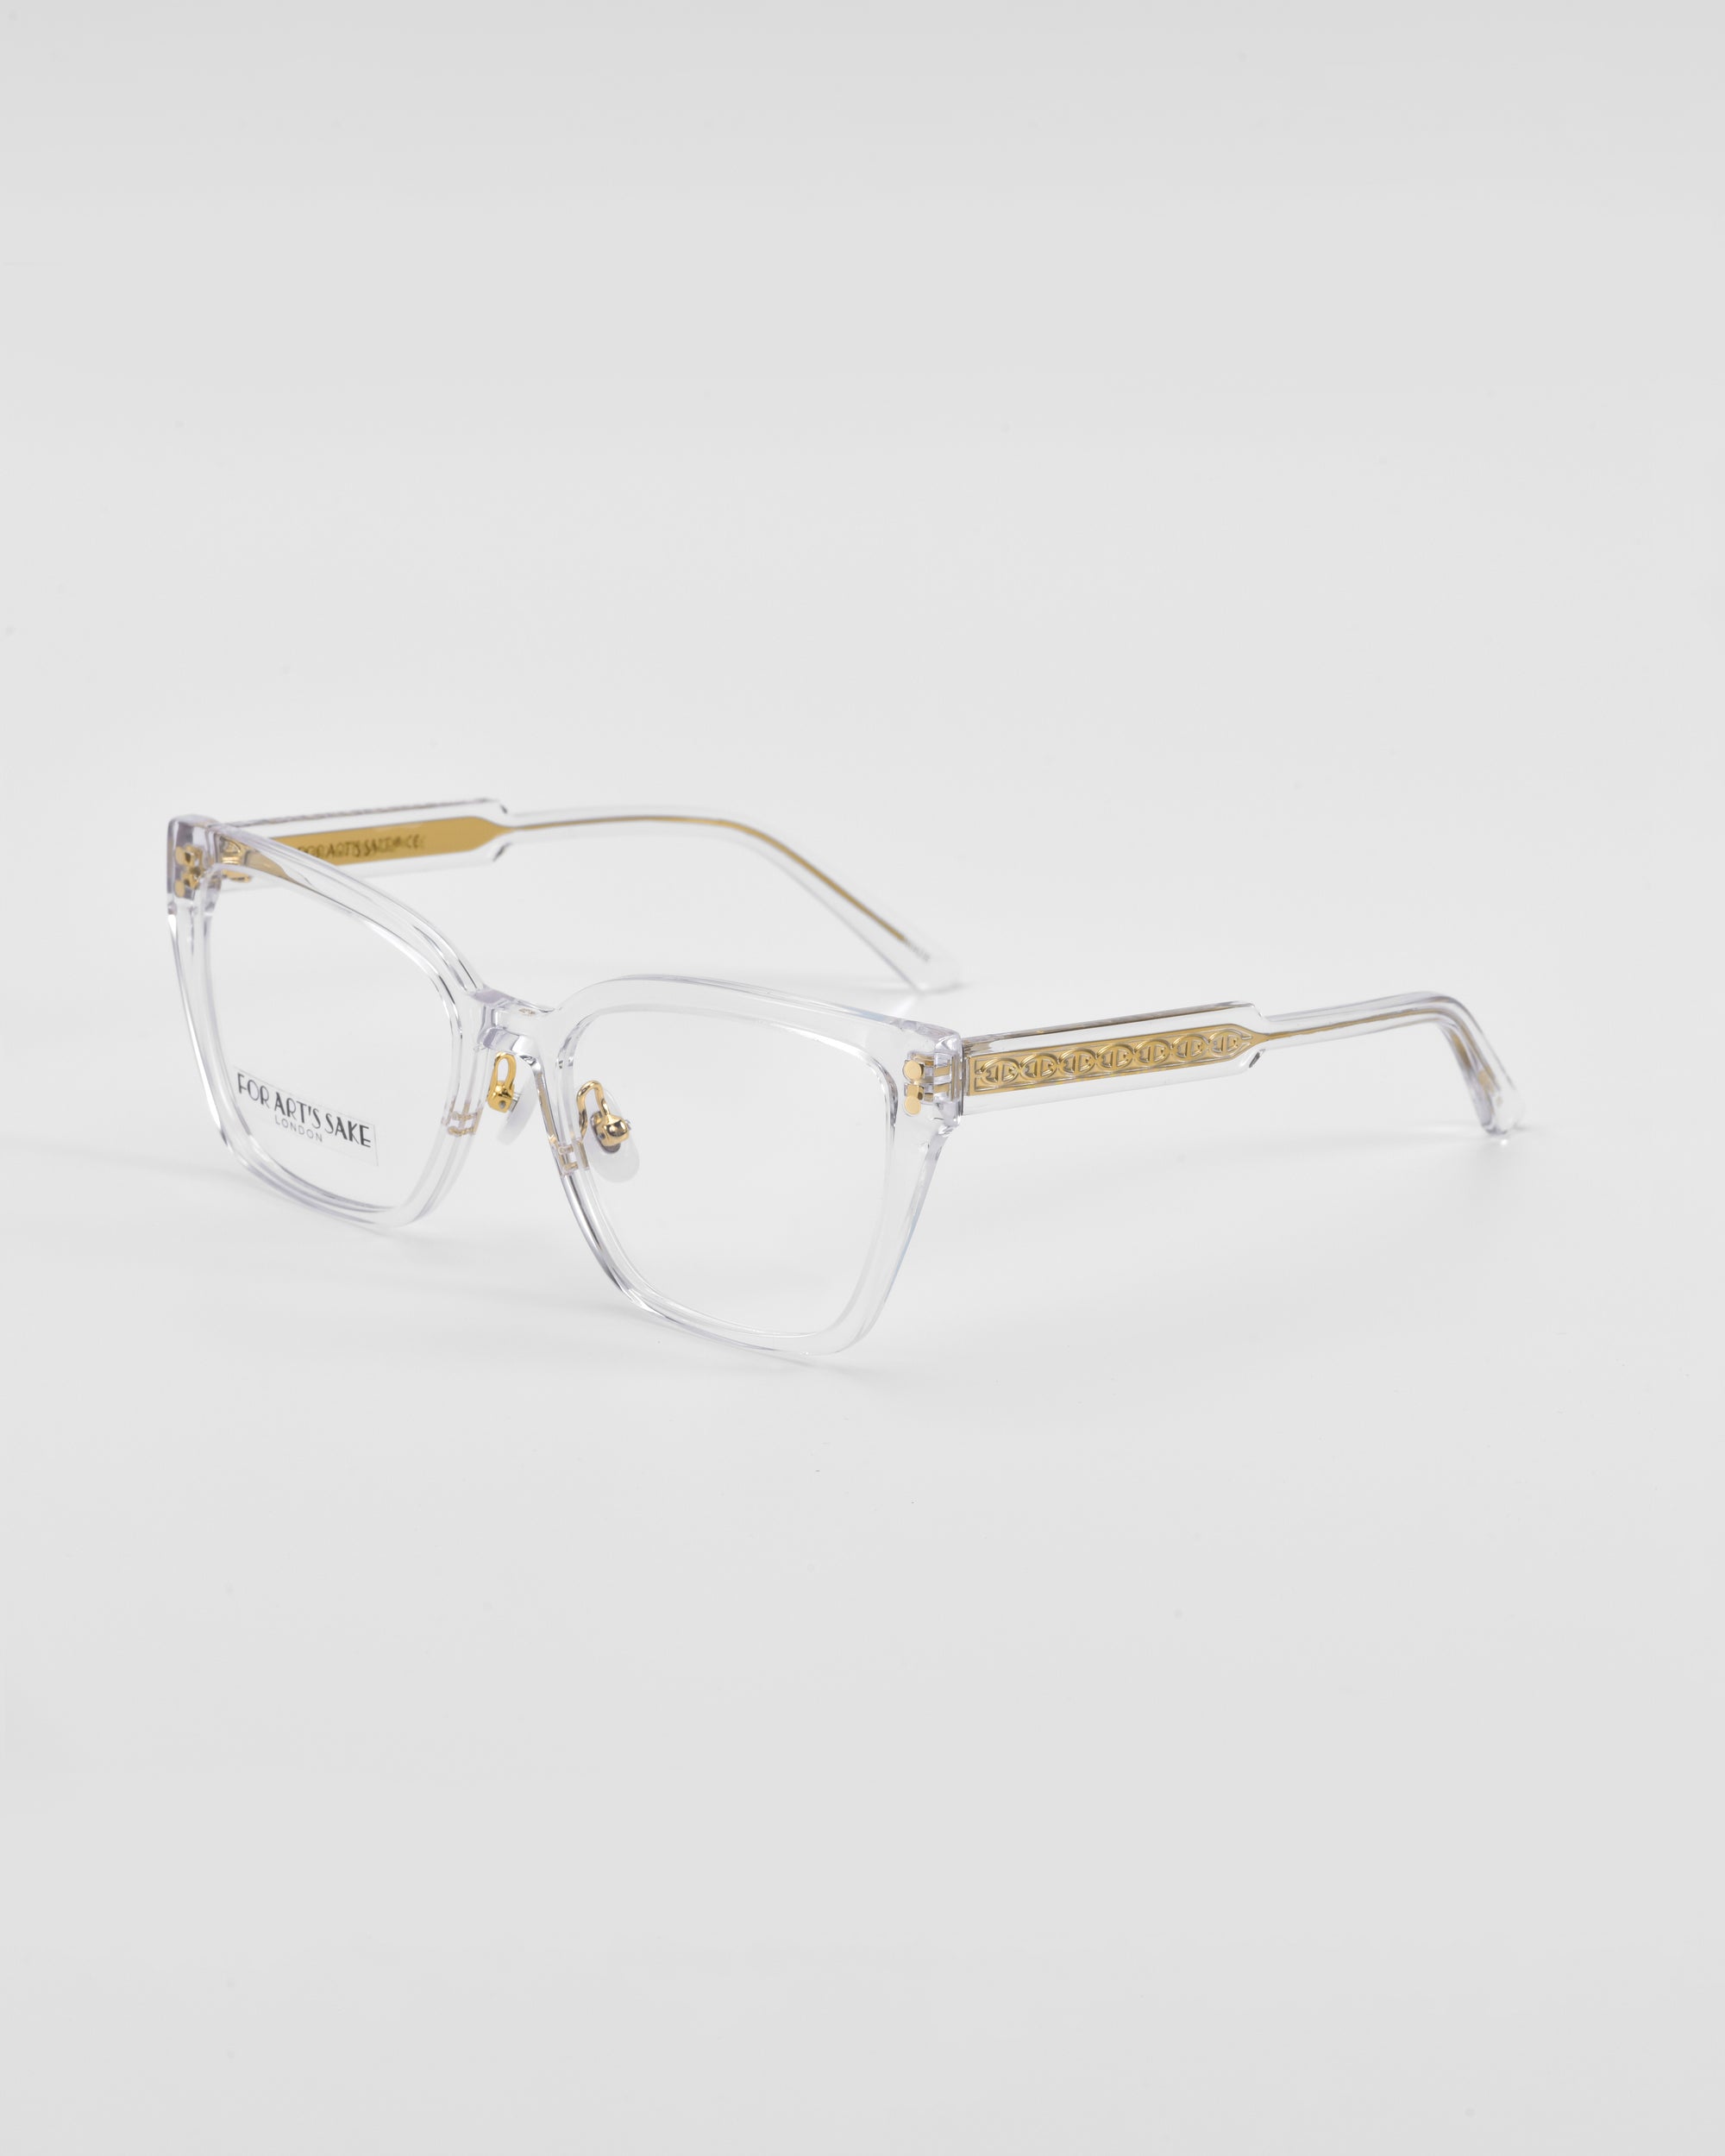 Abbey by For Art&#39;s Sake®: Clear cat-eye opticals with gold-accented temples, featuring a delicate link-chain pattern on the sides. The frames are transparent with a modern, minimalist design. The background is a plain, light grey color.